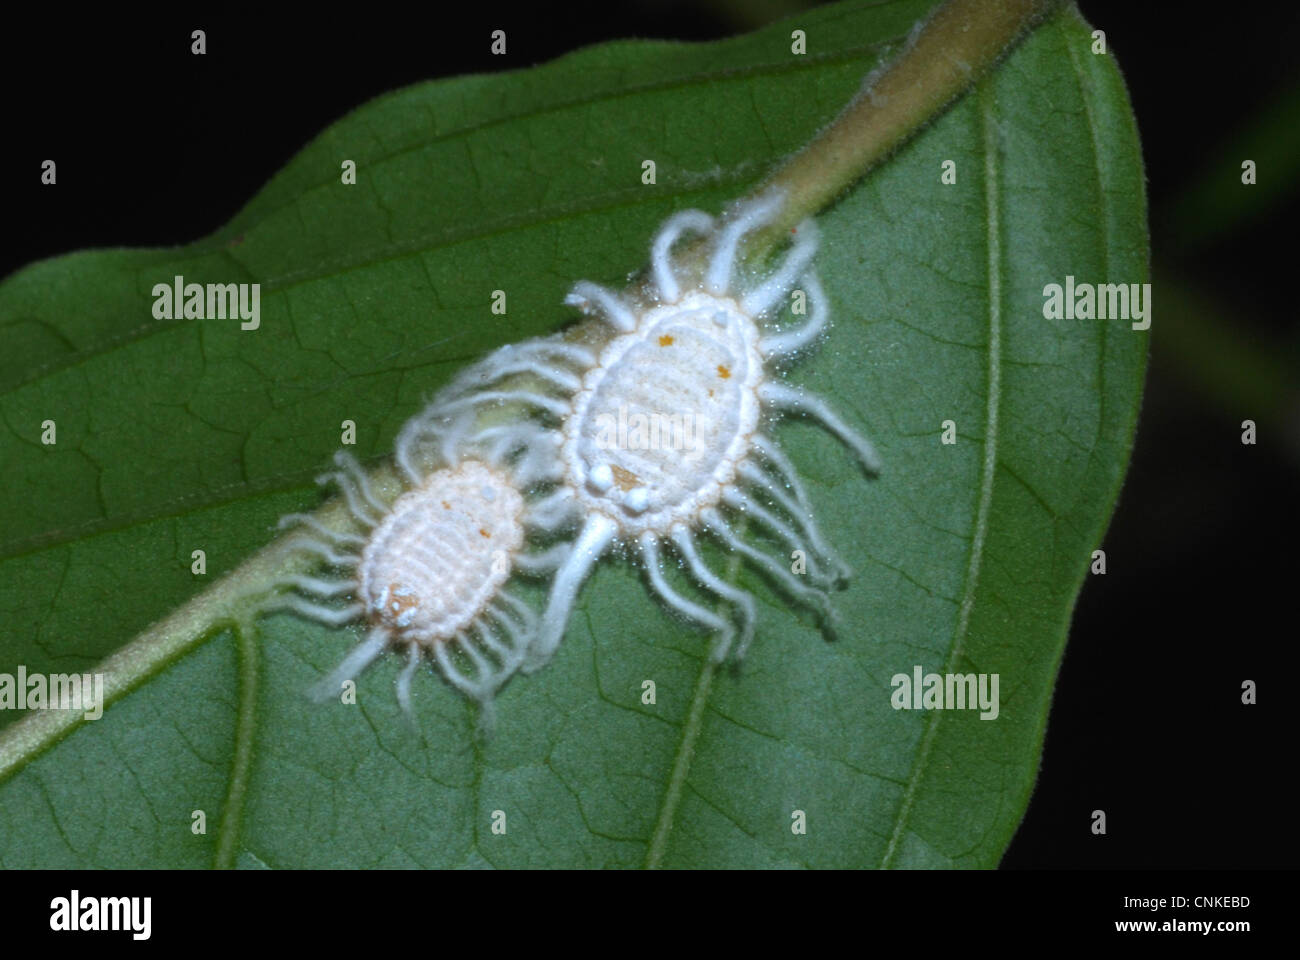 Mealybugs (Pseudococcidae sp.) aka scale insects infesting a Guava tree in an orchard in Tak, Thailand. Stock Photo